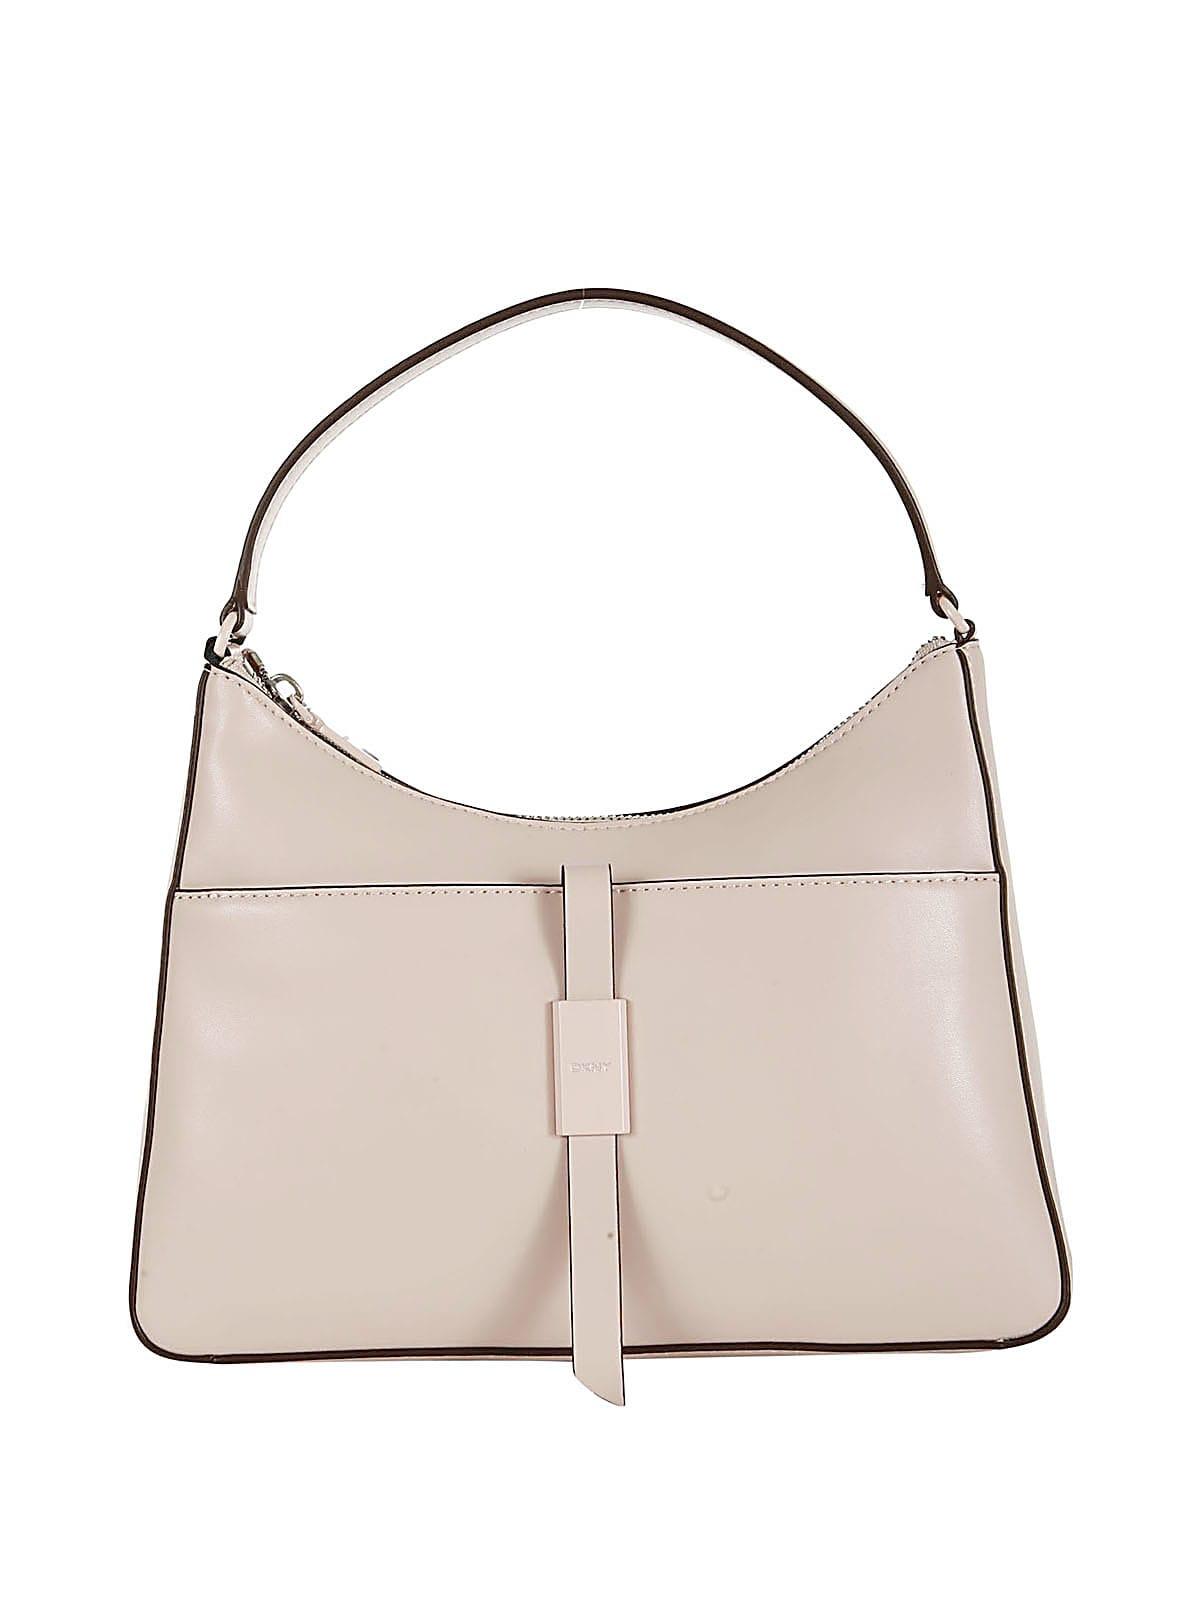 Find DKNY BAGS by Shringar collection near me